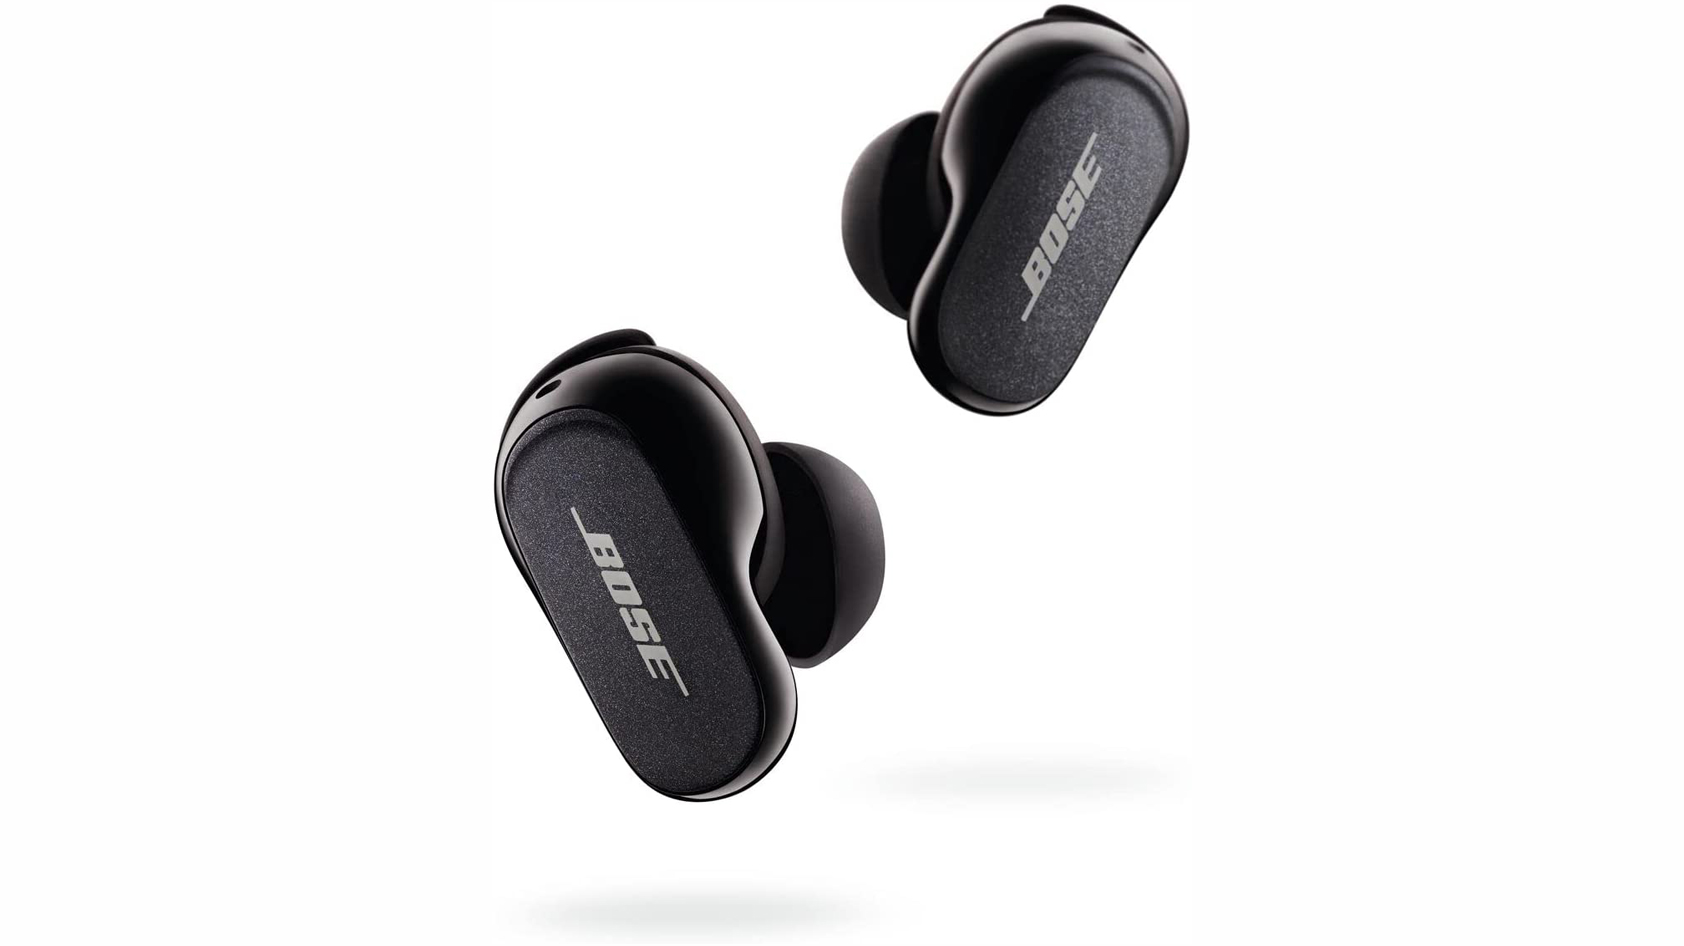 Image of Bose QuietComfort Earbuds II on a white background